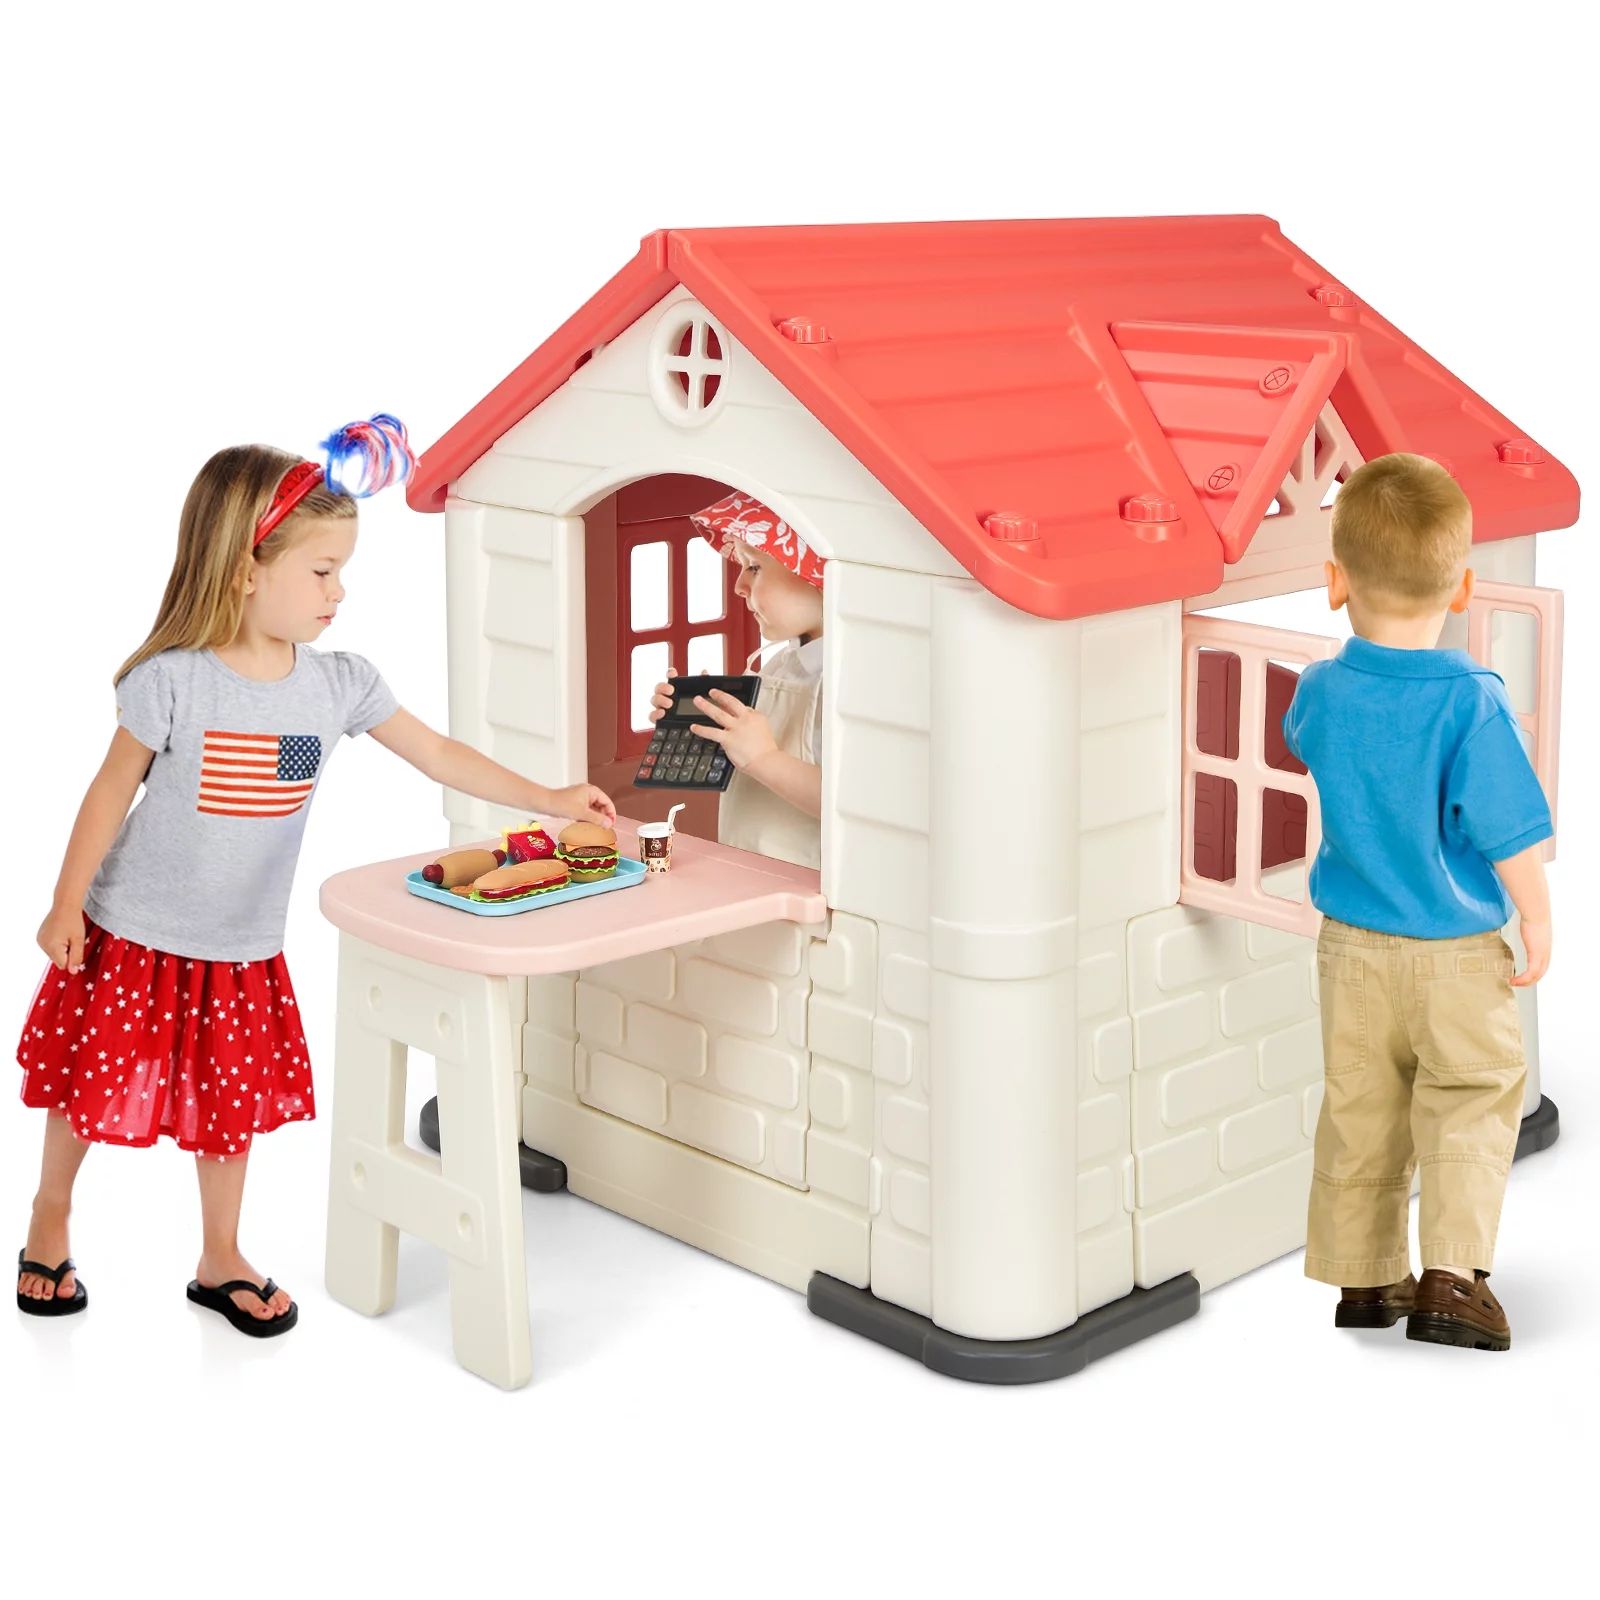 Infans Kid's Playhouse Games Cottage w/ 7 PCS Toy Set & Waterproof Cover Pink | Walmart (US)